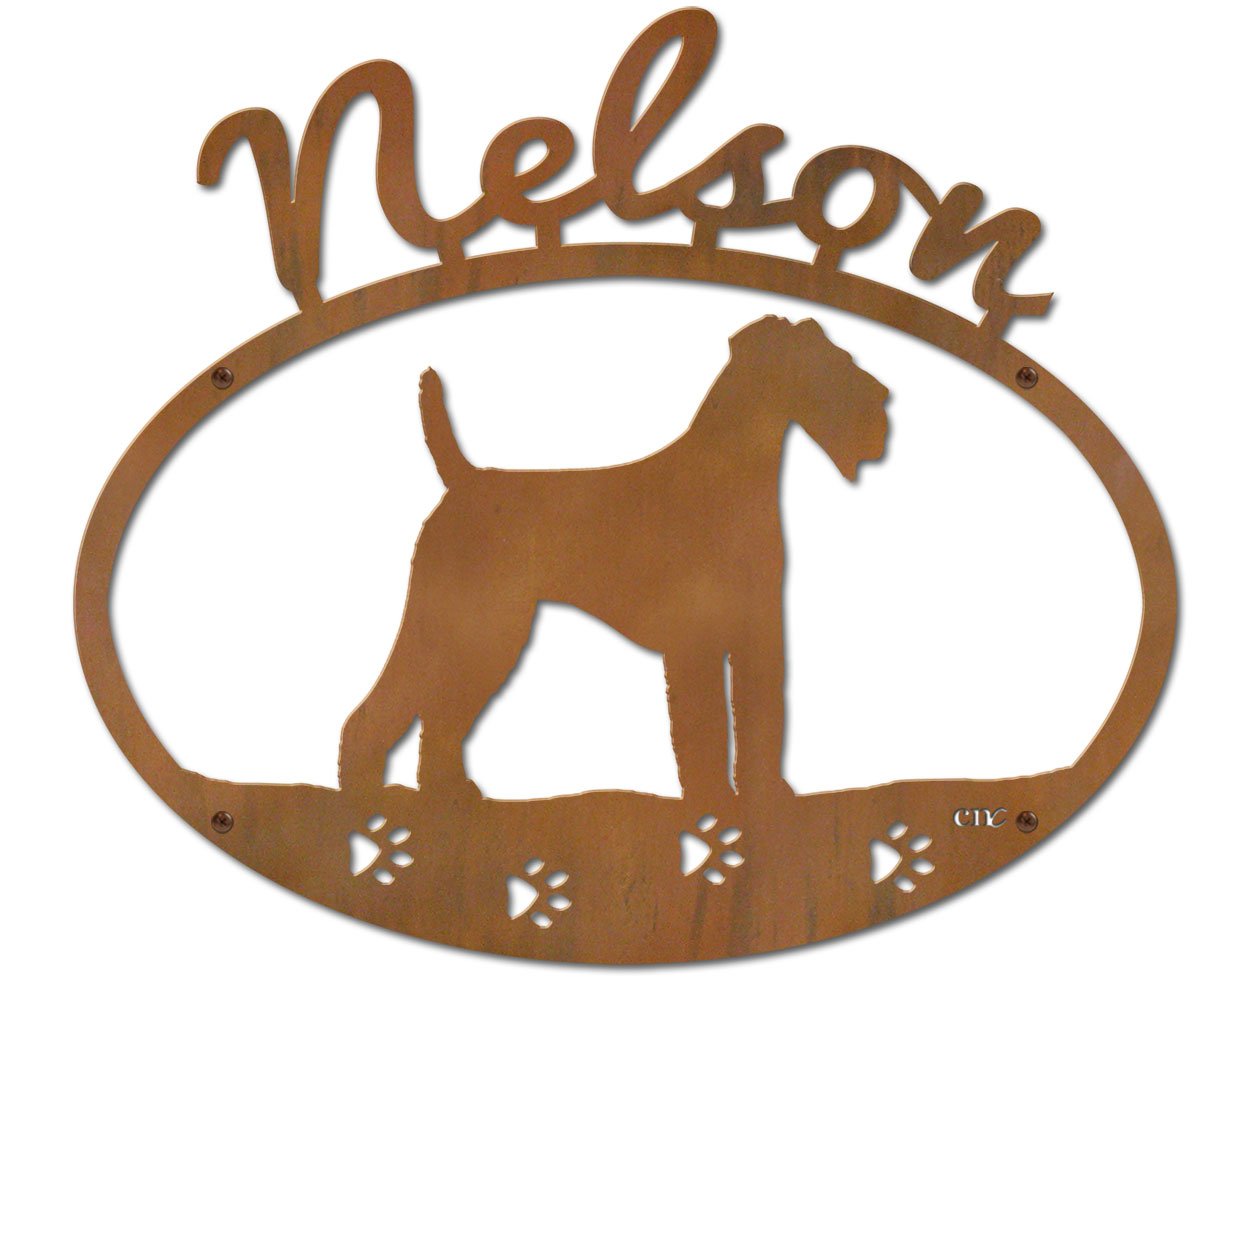 600925 - Airedale Custom Metal Name Sign